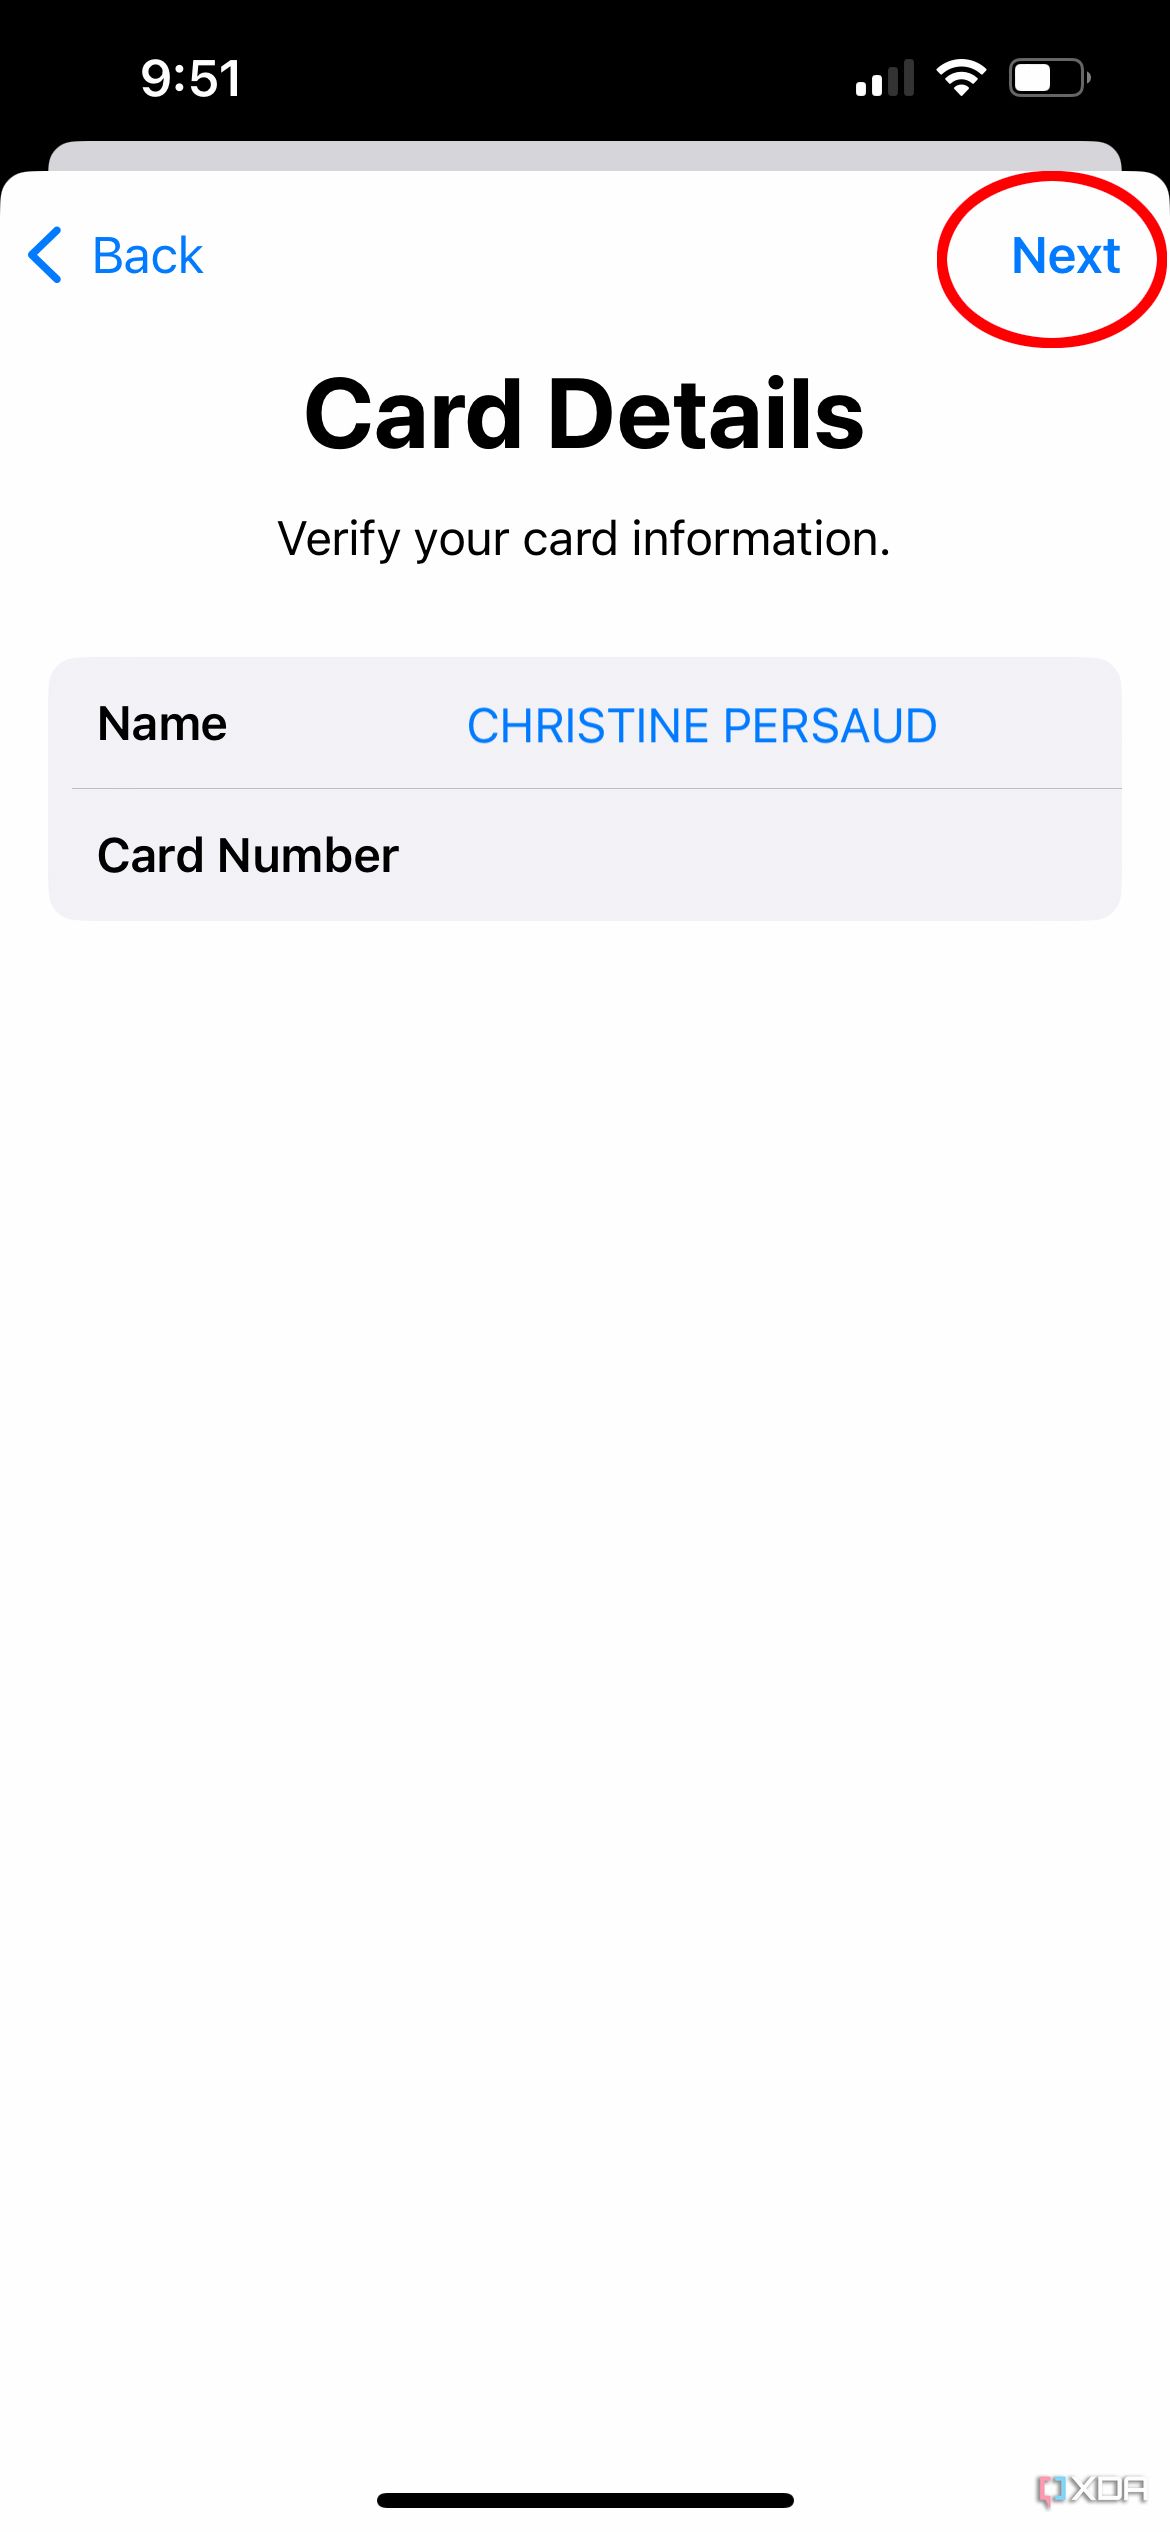 The card details screen when adding a card to Apple Wallet.